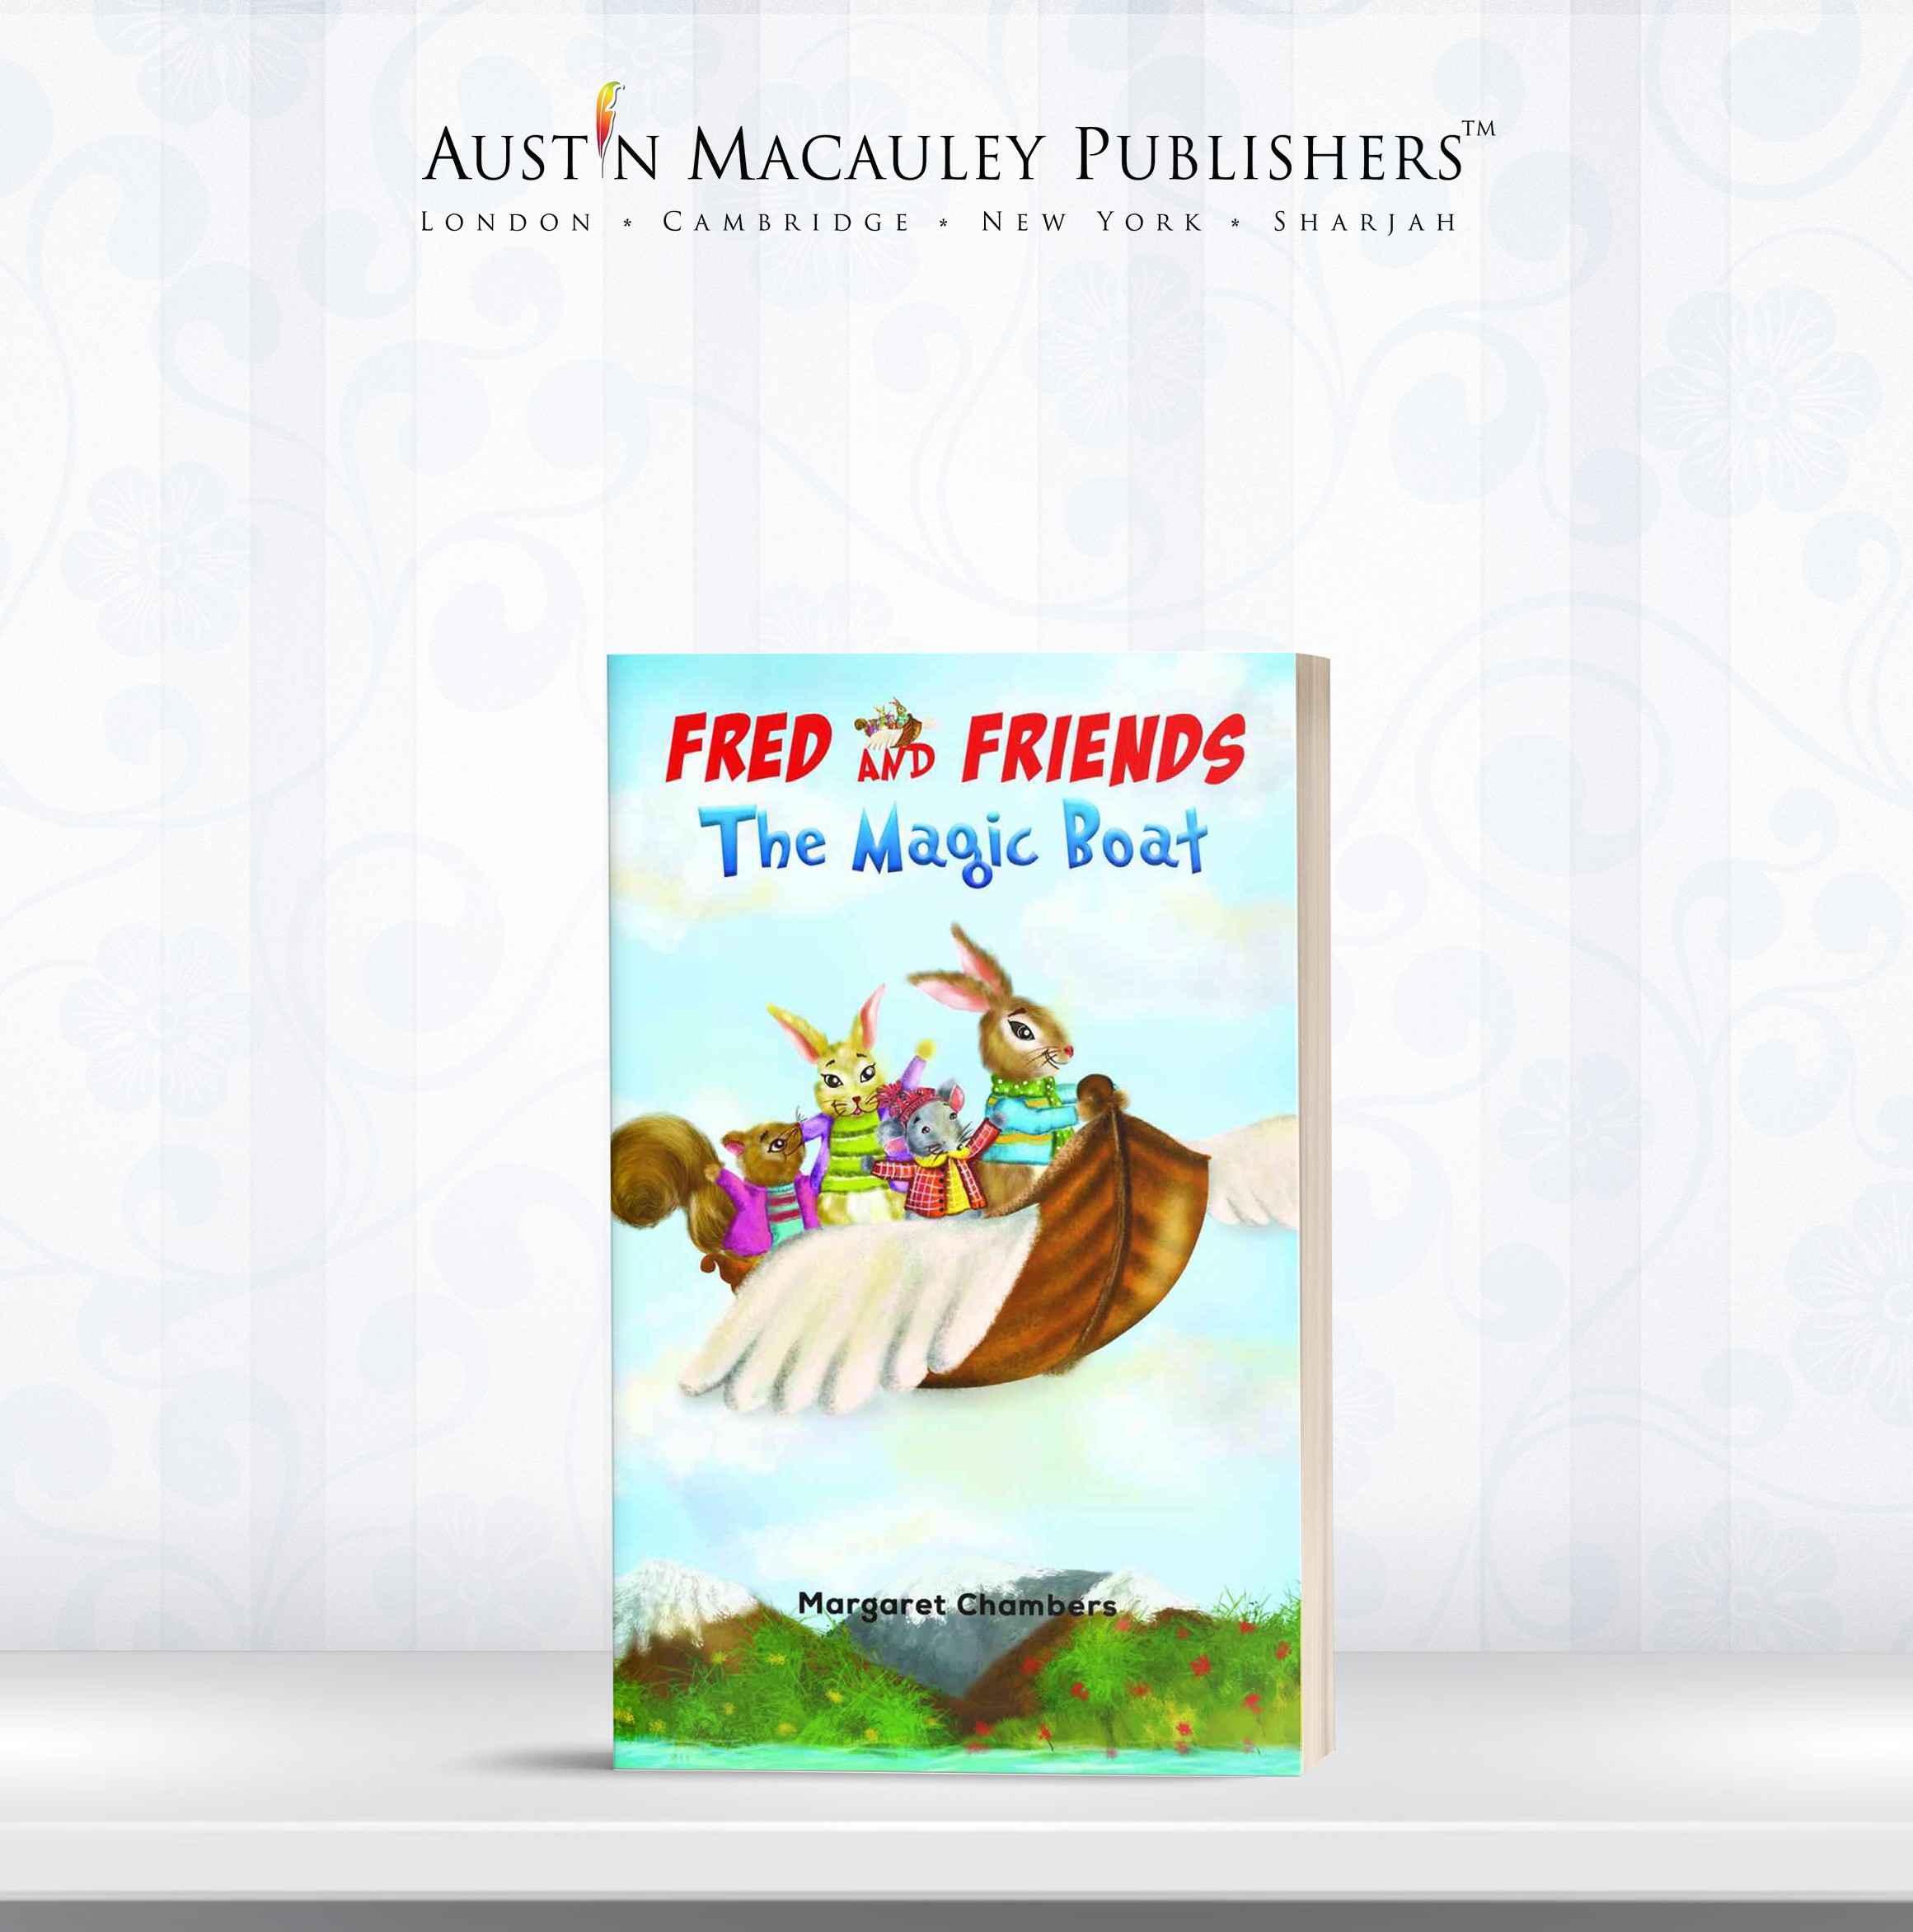 Fred and Friends Author Margaret Chambers Interviewed by The Stamford Mercury